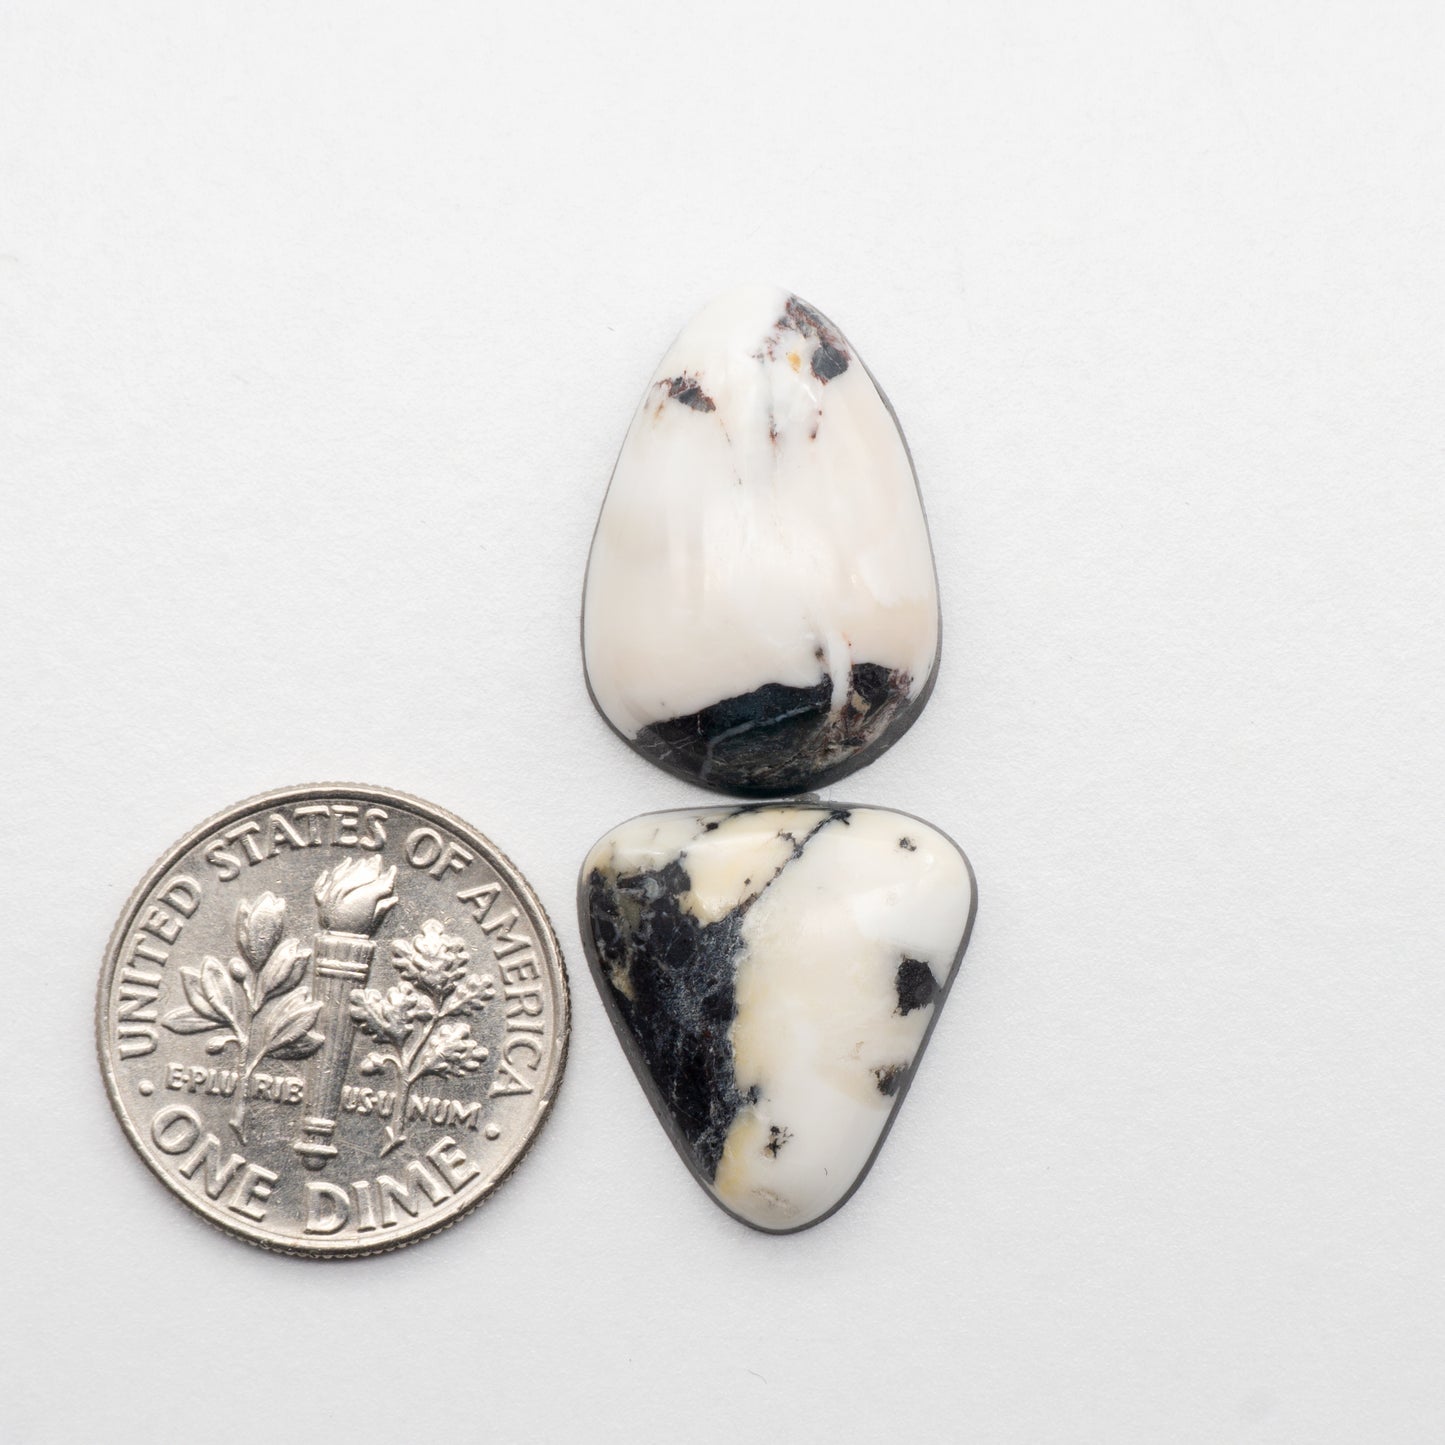 White Buffalo Stone Cabochons are semi-precious gemstones cut into shapes ideal for jewelry-making and crafting. The unique and varied veining of each cabochon lend an unparalleled depth and detail to any project, making them an excellent choice for artisans looking to add an individualistic touch.